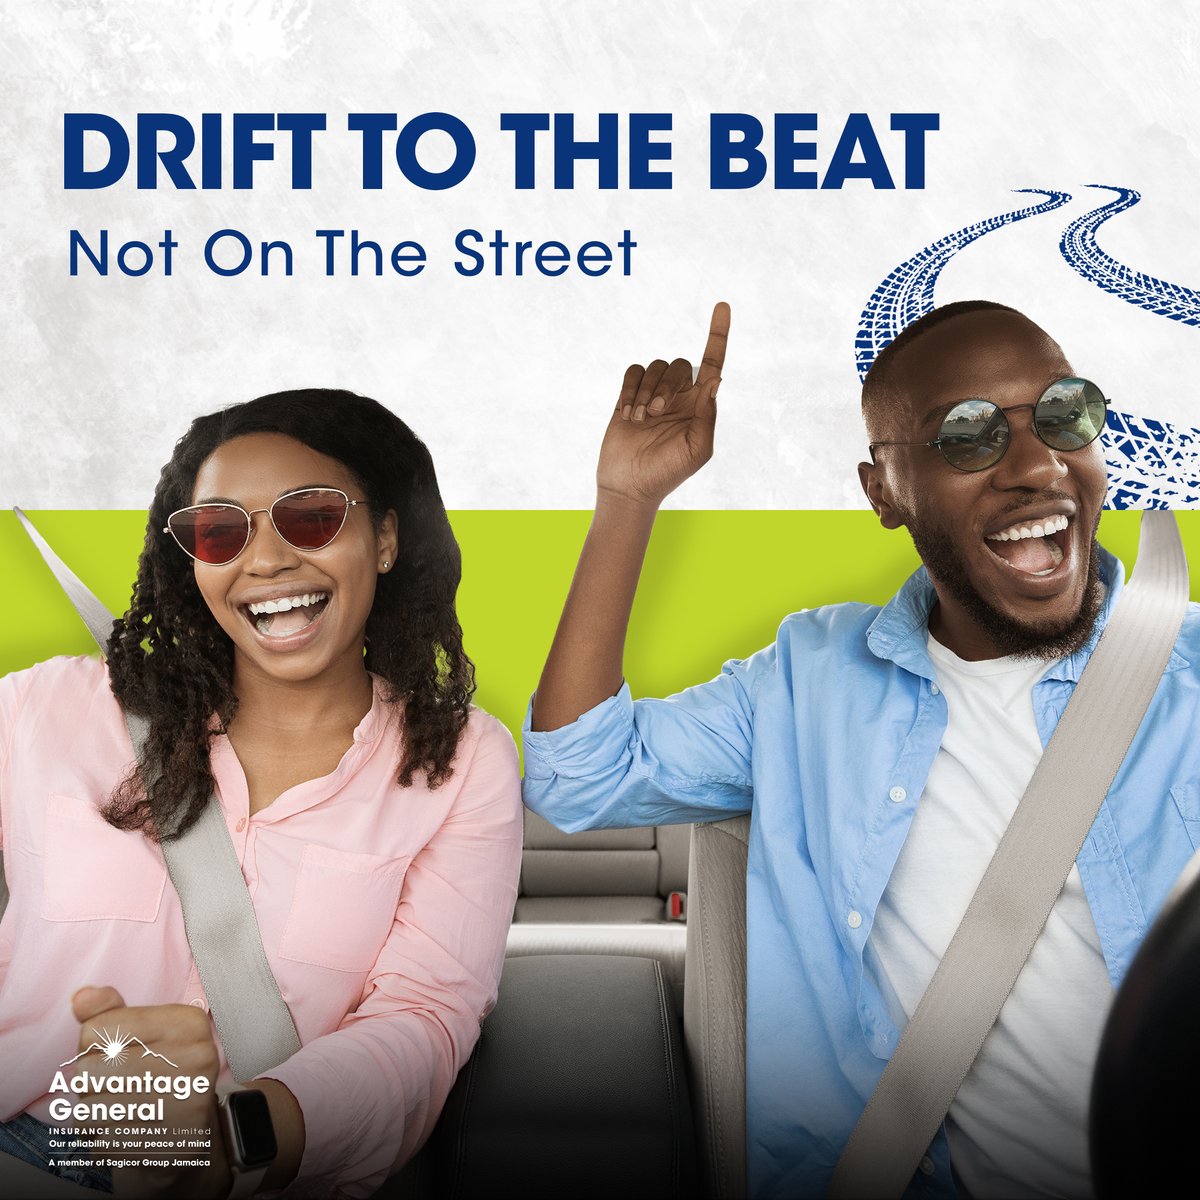 The only drifting you should be doing this summer is the dance. Practice safe driving!

Stay calm, stay safe on the roads!

#AGIC #AdvantageGeneralInsuranceCompany #roadsafetyawarenessmonth  #drivesafely